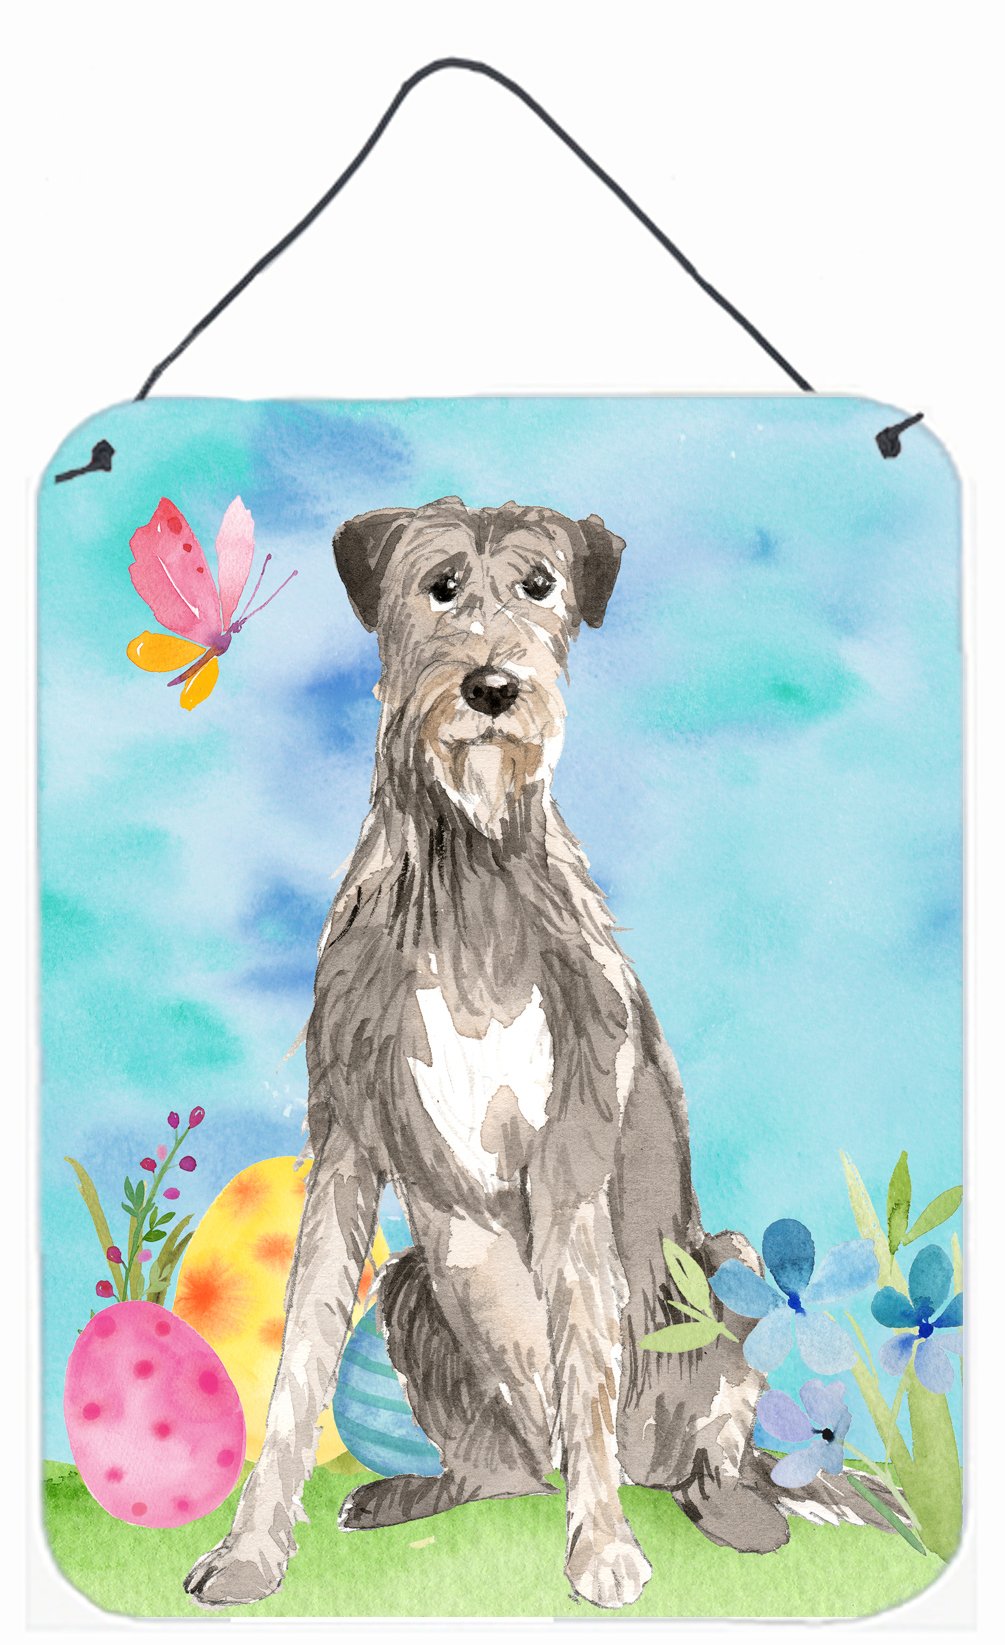 Easter Eggs Irish Wolfhound Wall or Door Hanging Prints CK1913DS1216 by Caroline's Treasures